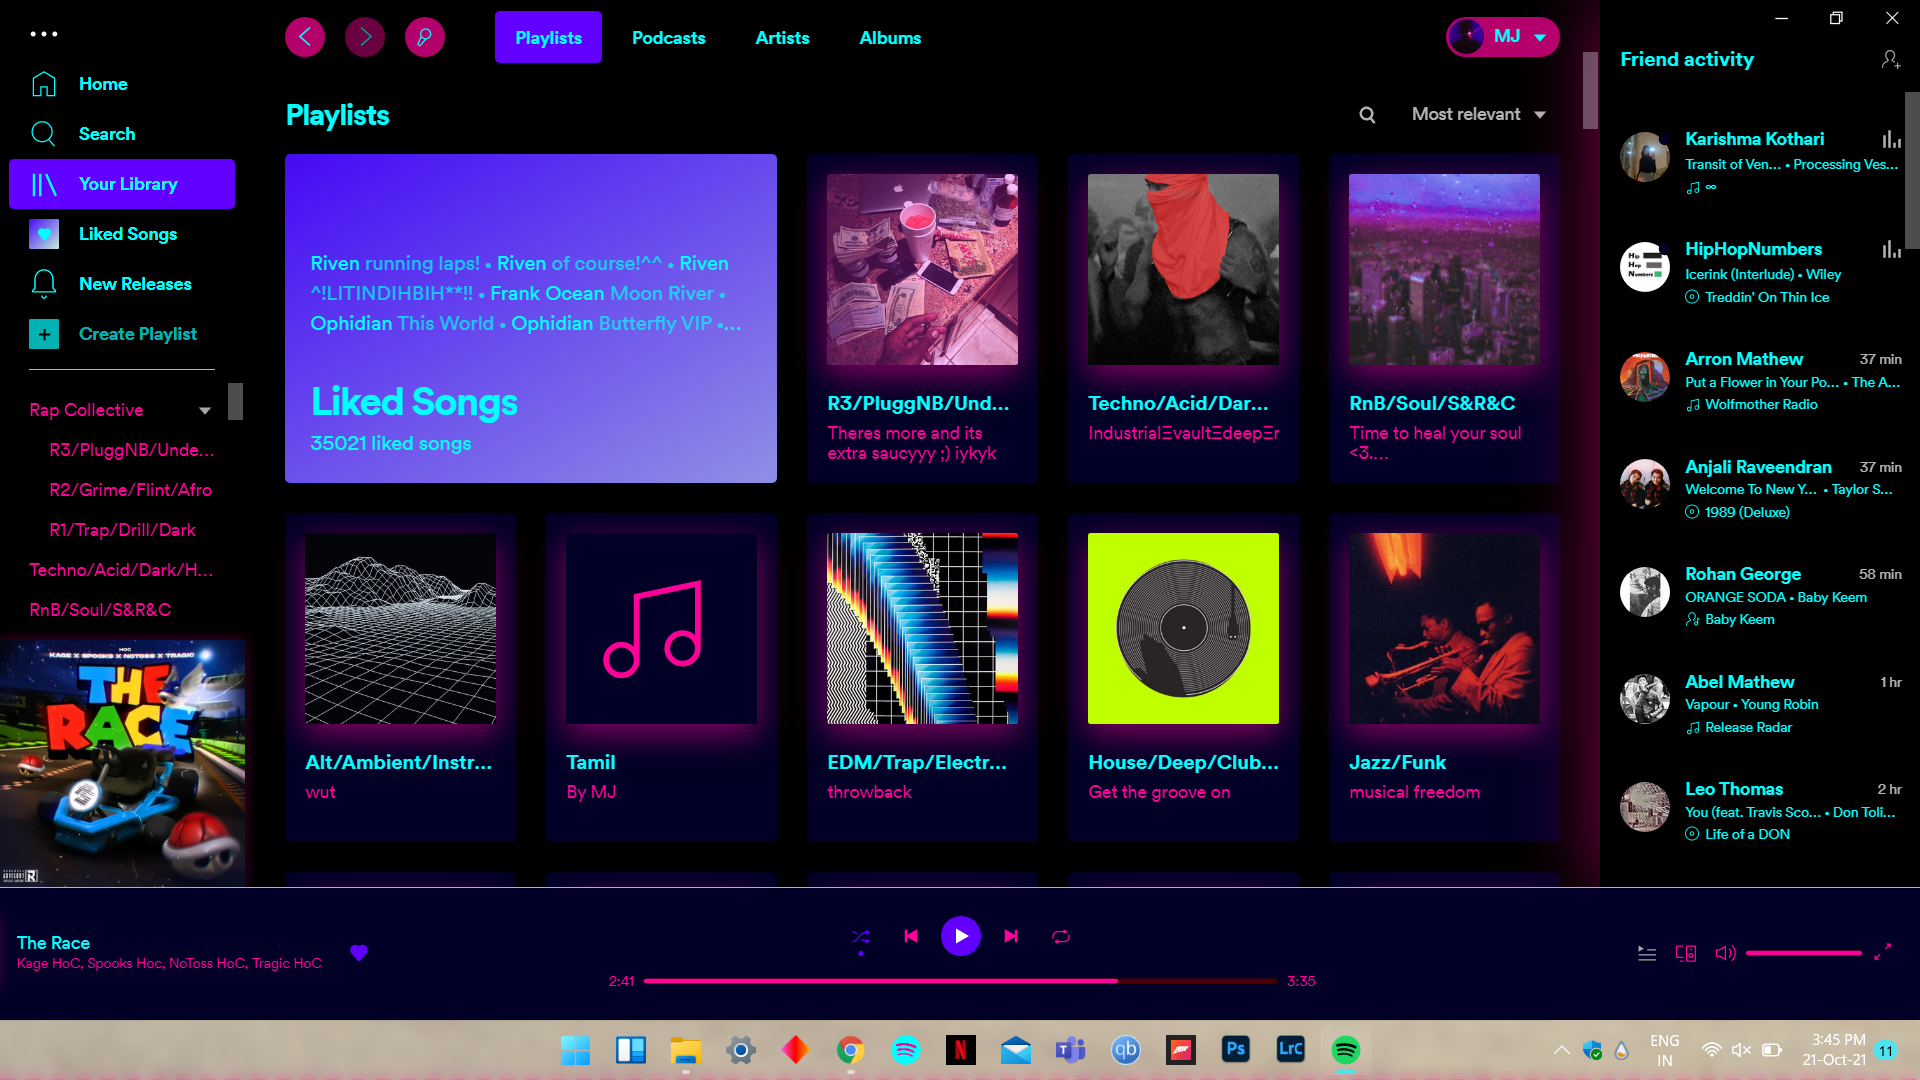 Spicetify Themes - A Powerful And Flexible Tool To Fully Customize Your Spotify Experience